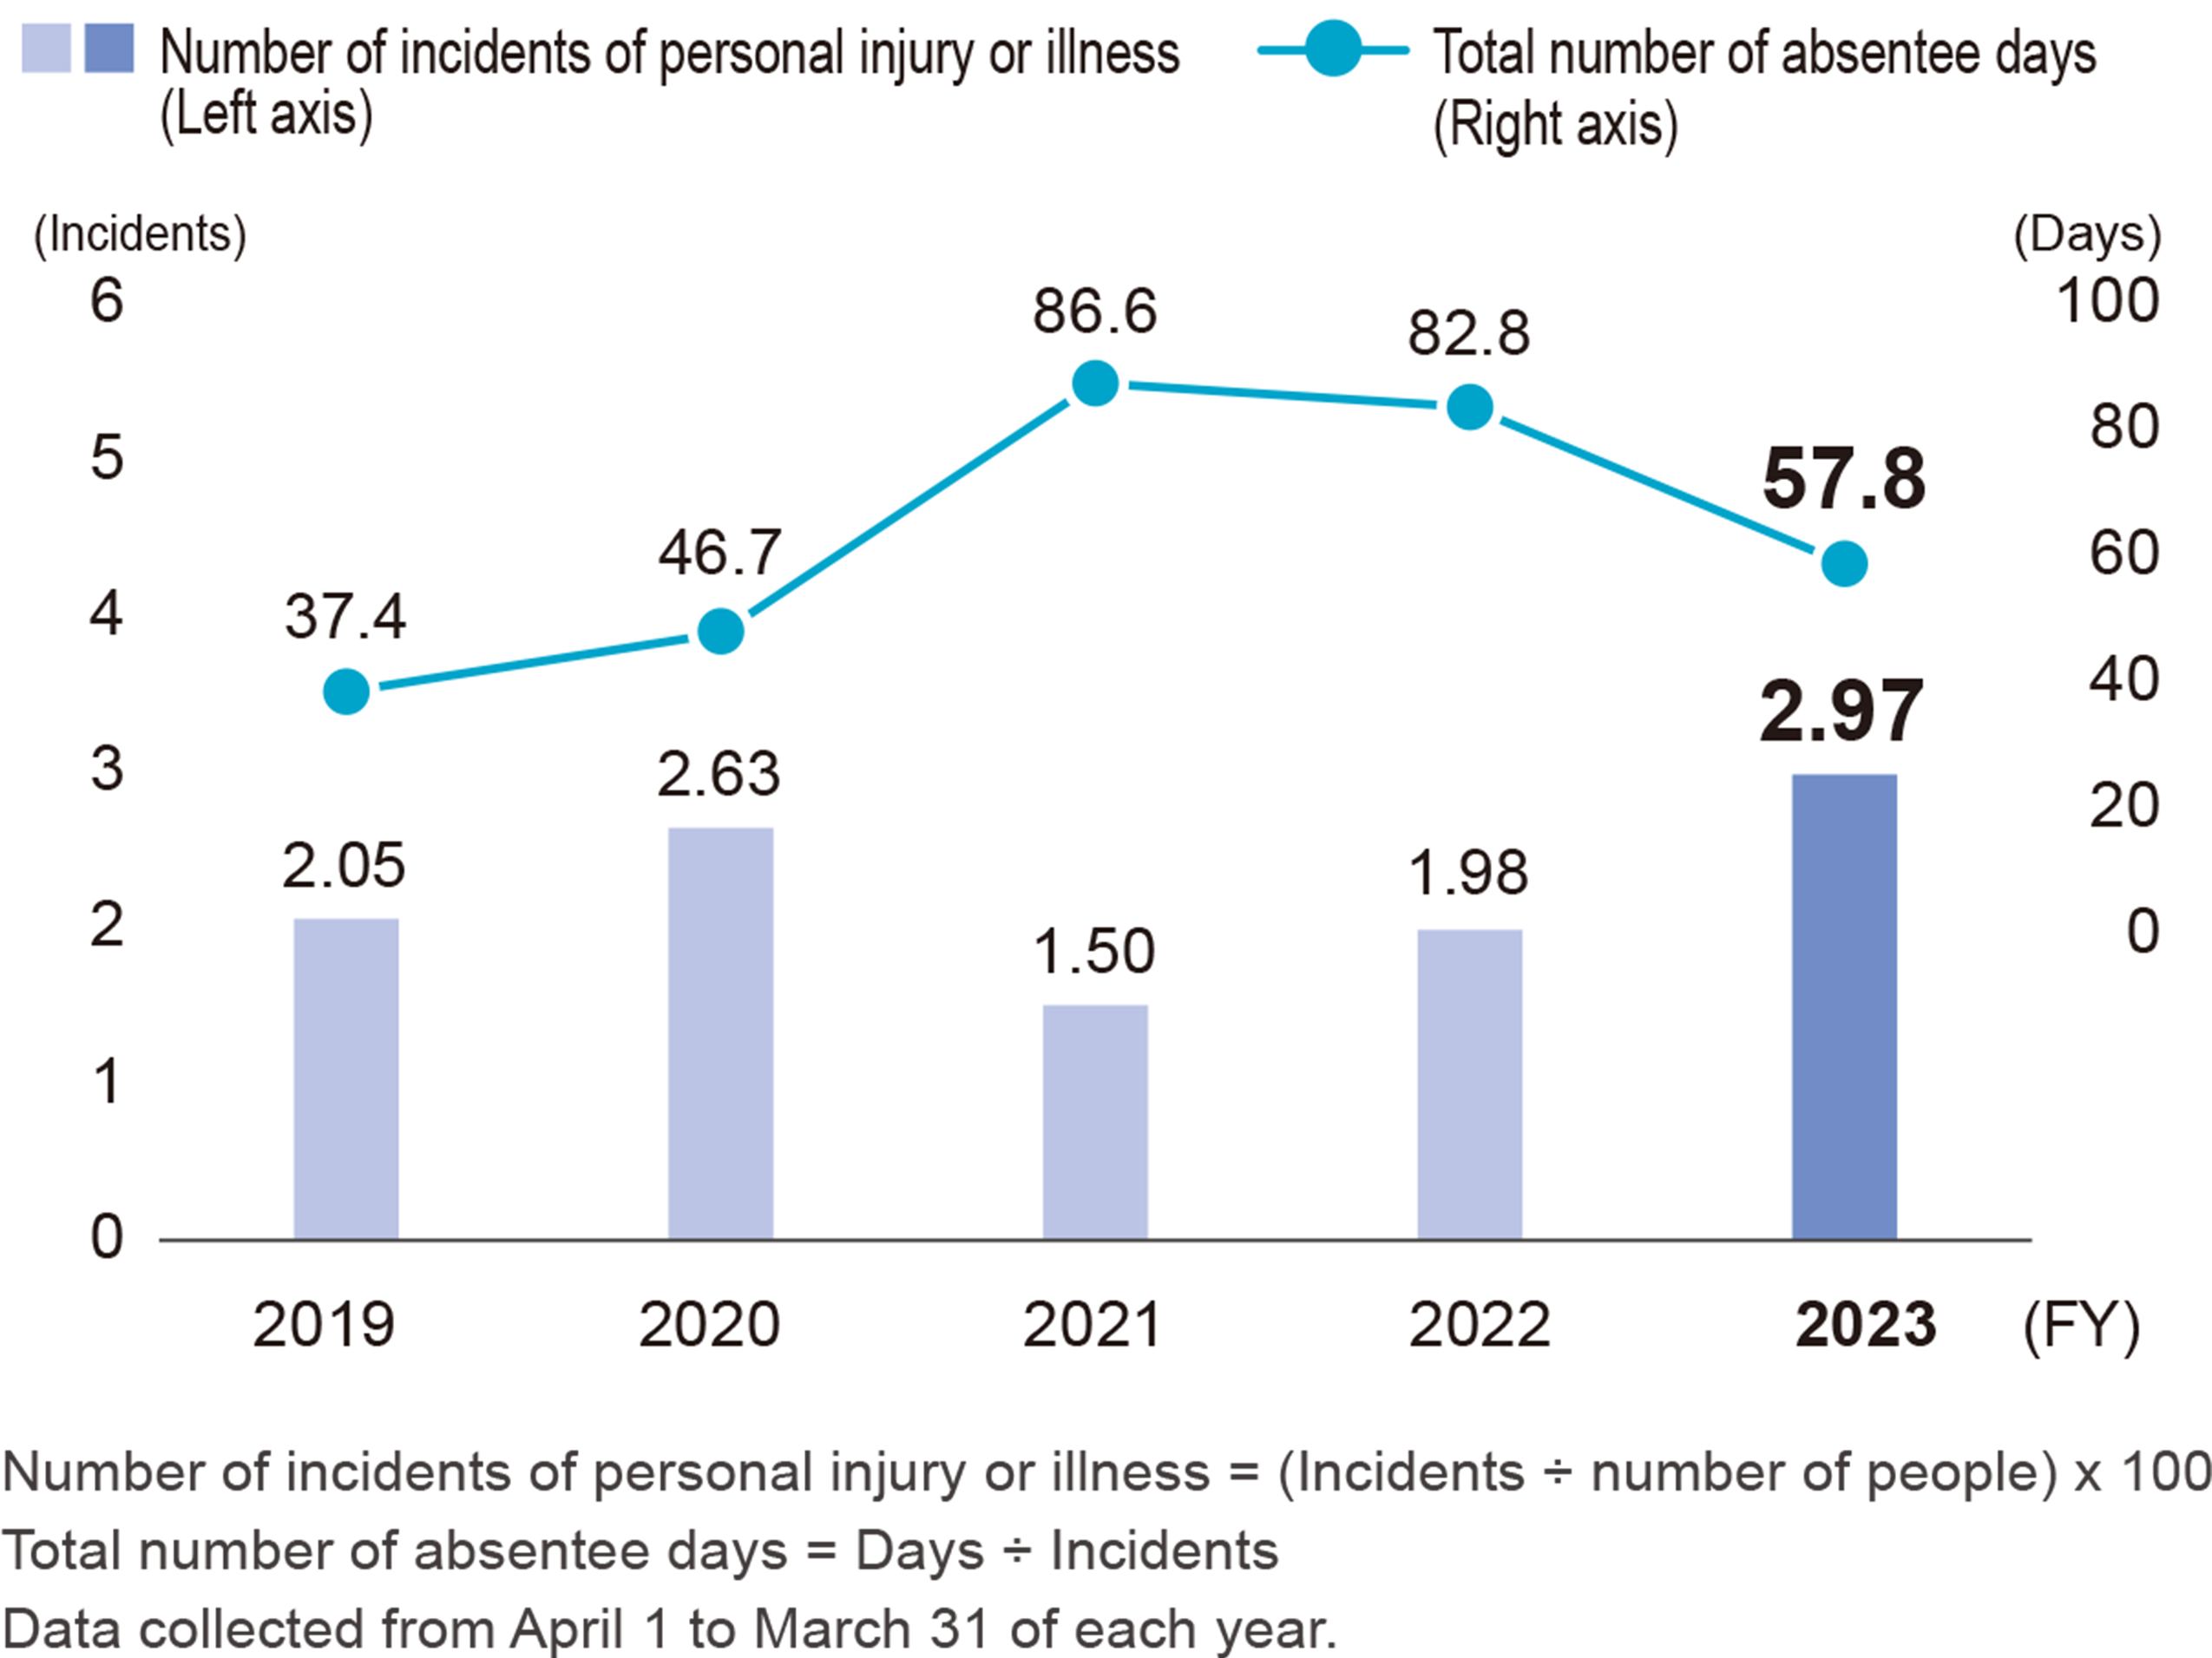 Number of incidents of personal injury or illness